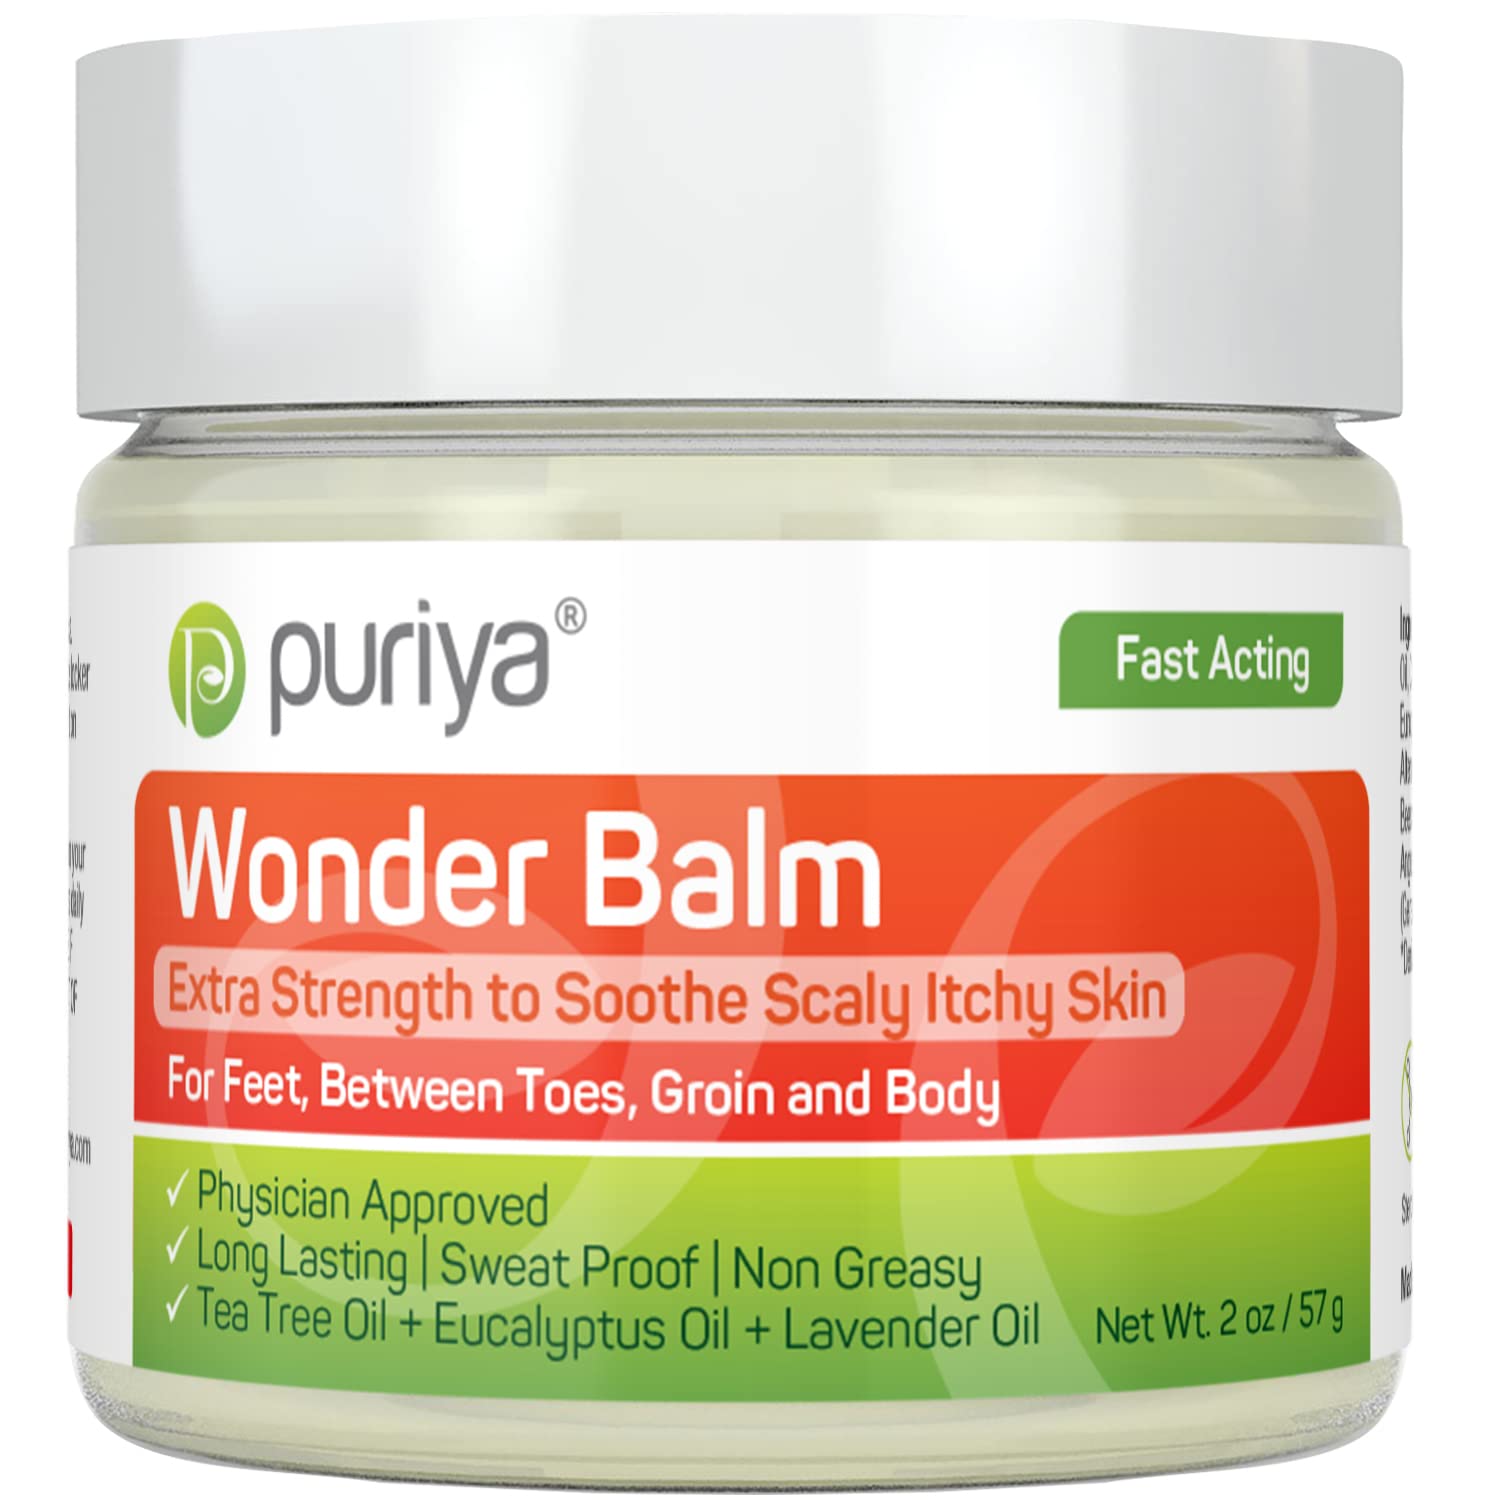 Puriya Tea Tree Oil Wonder Balm and Body Wash for Men, Women Bundle Set, Physician Formulated Extra Strength Soap, Doctor Approved, Extra Strength for Athletes Itchy Foot, Jock Itch, Fast Acting